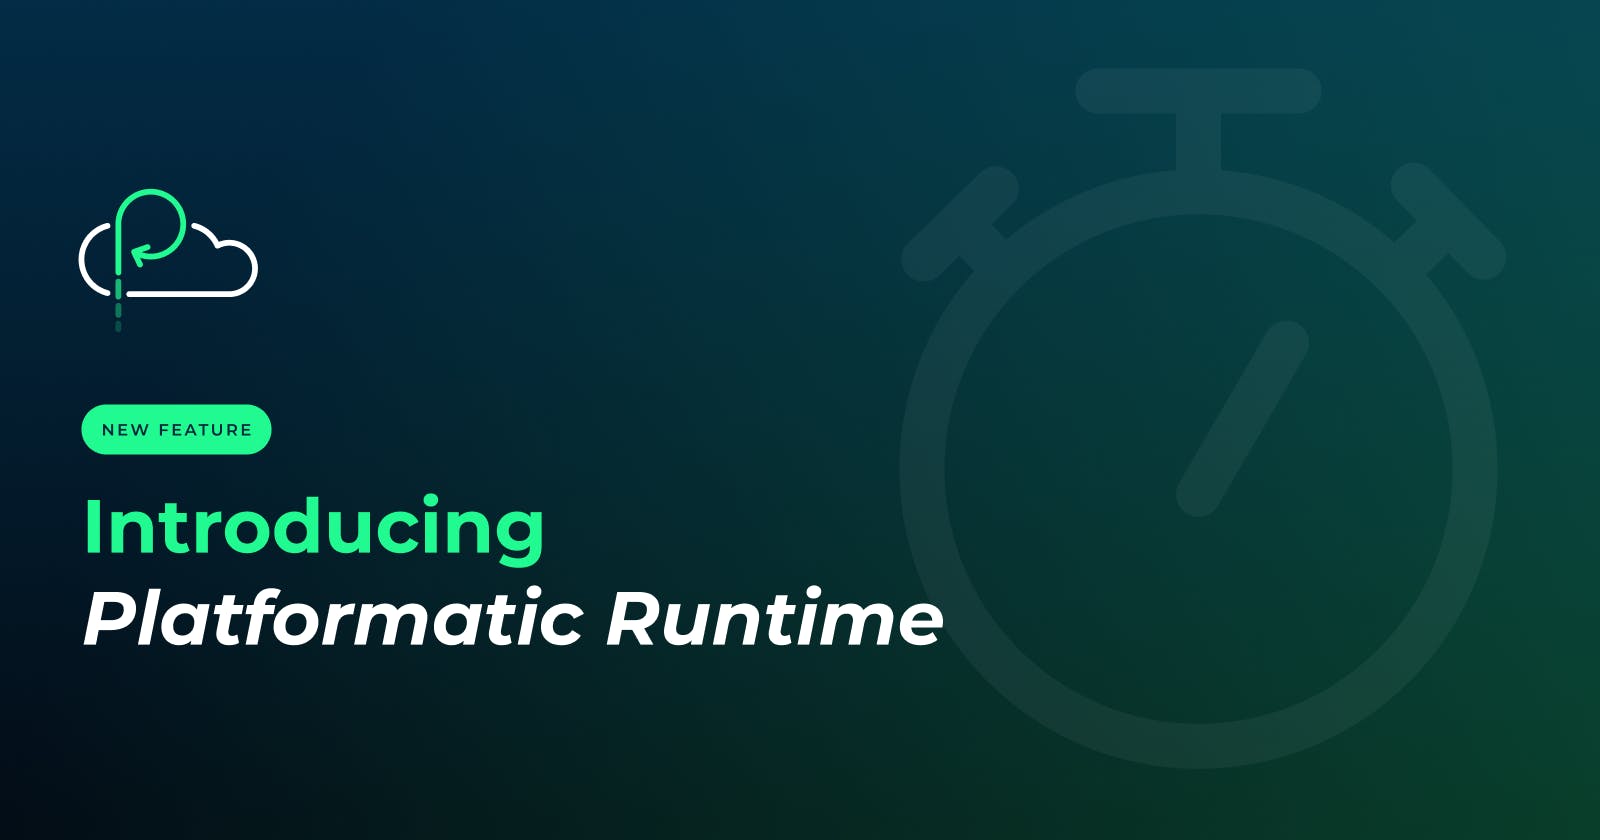 An end to isolation: Introducing Platformatic Runtime